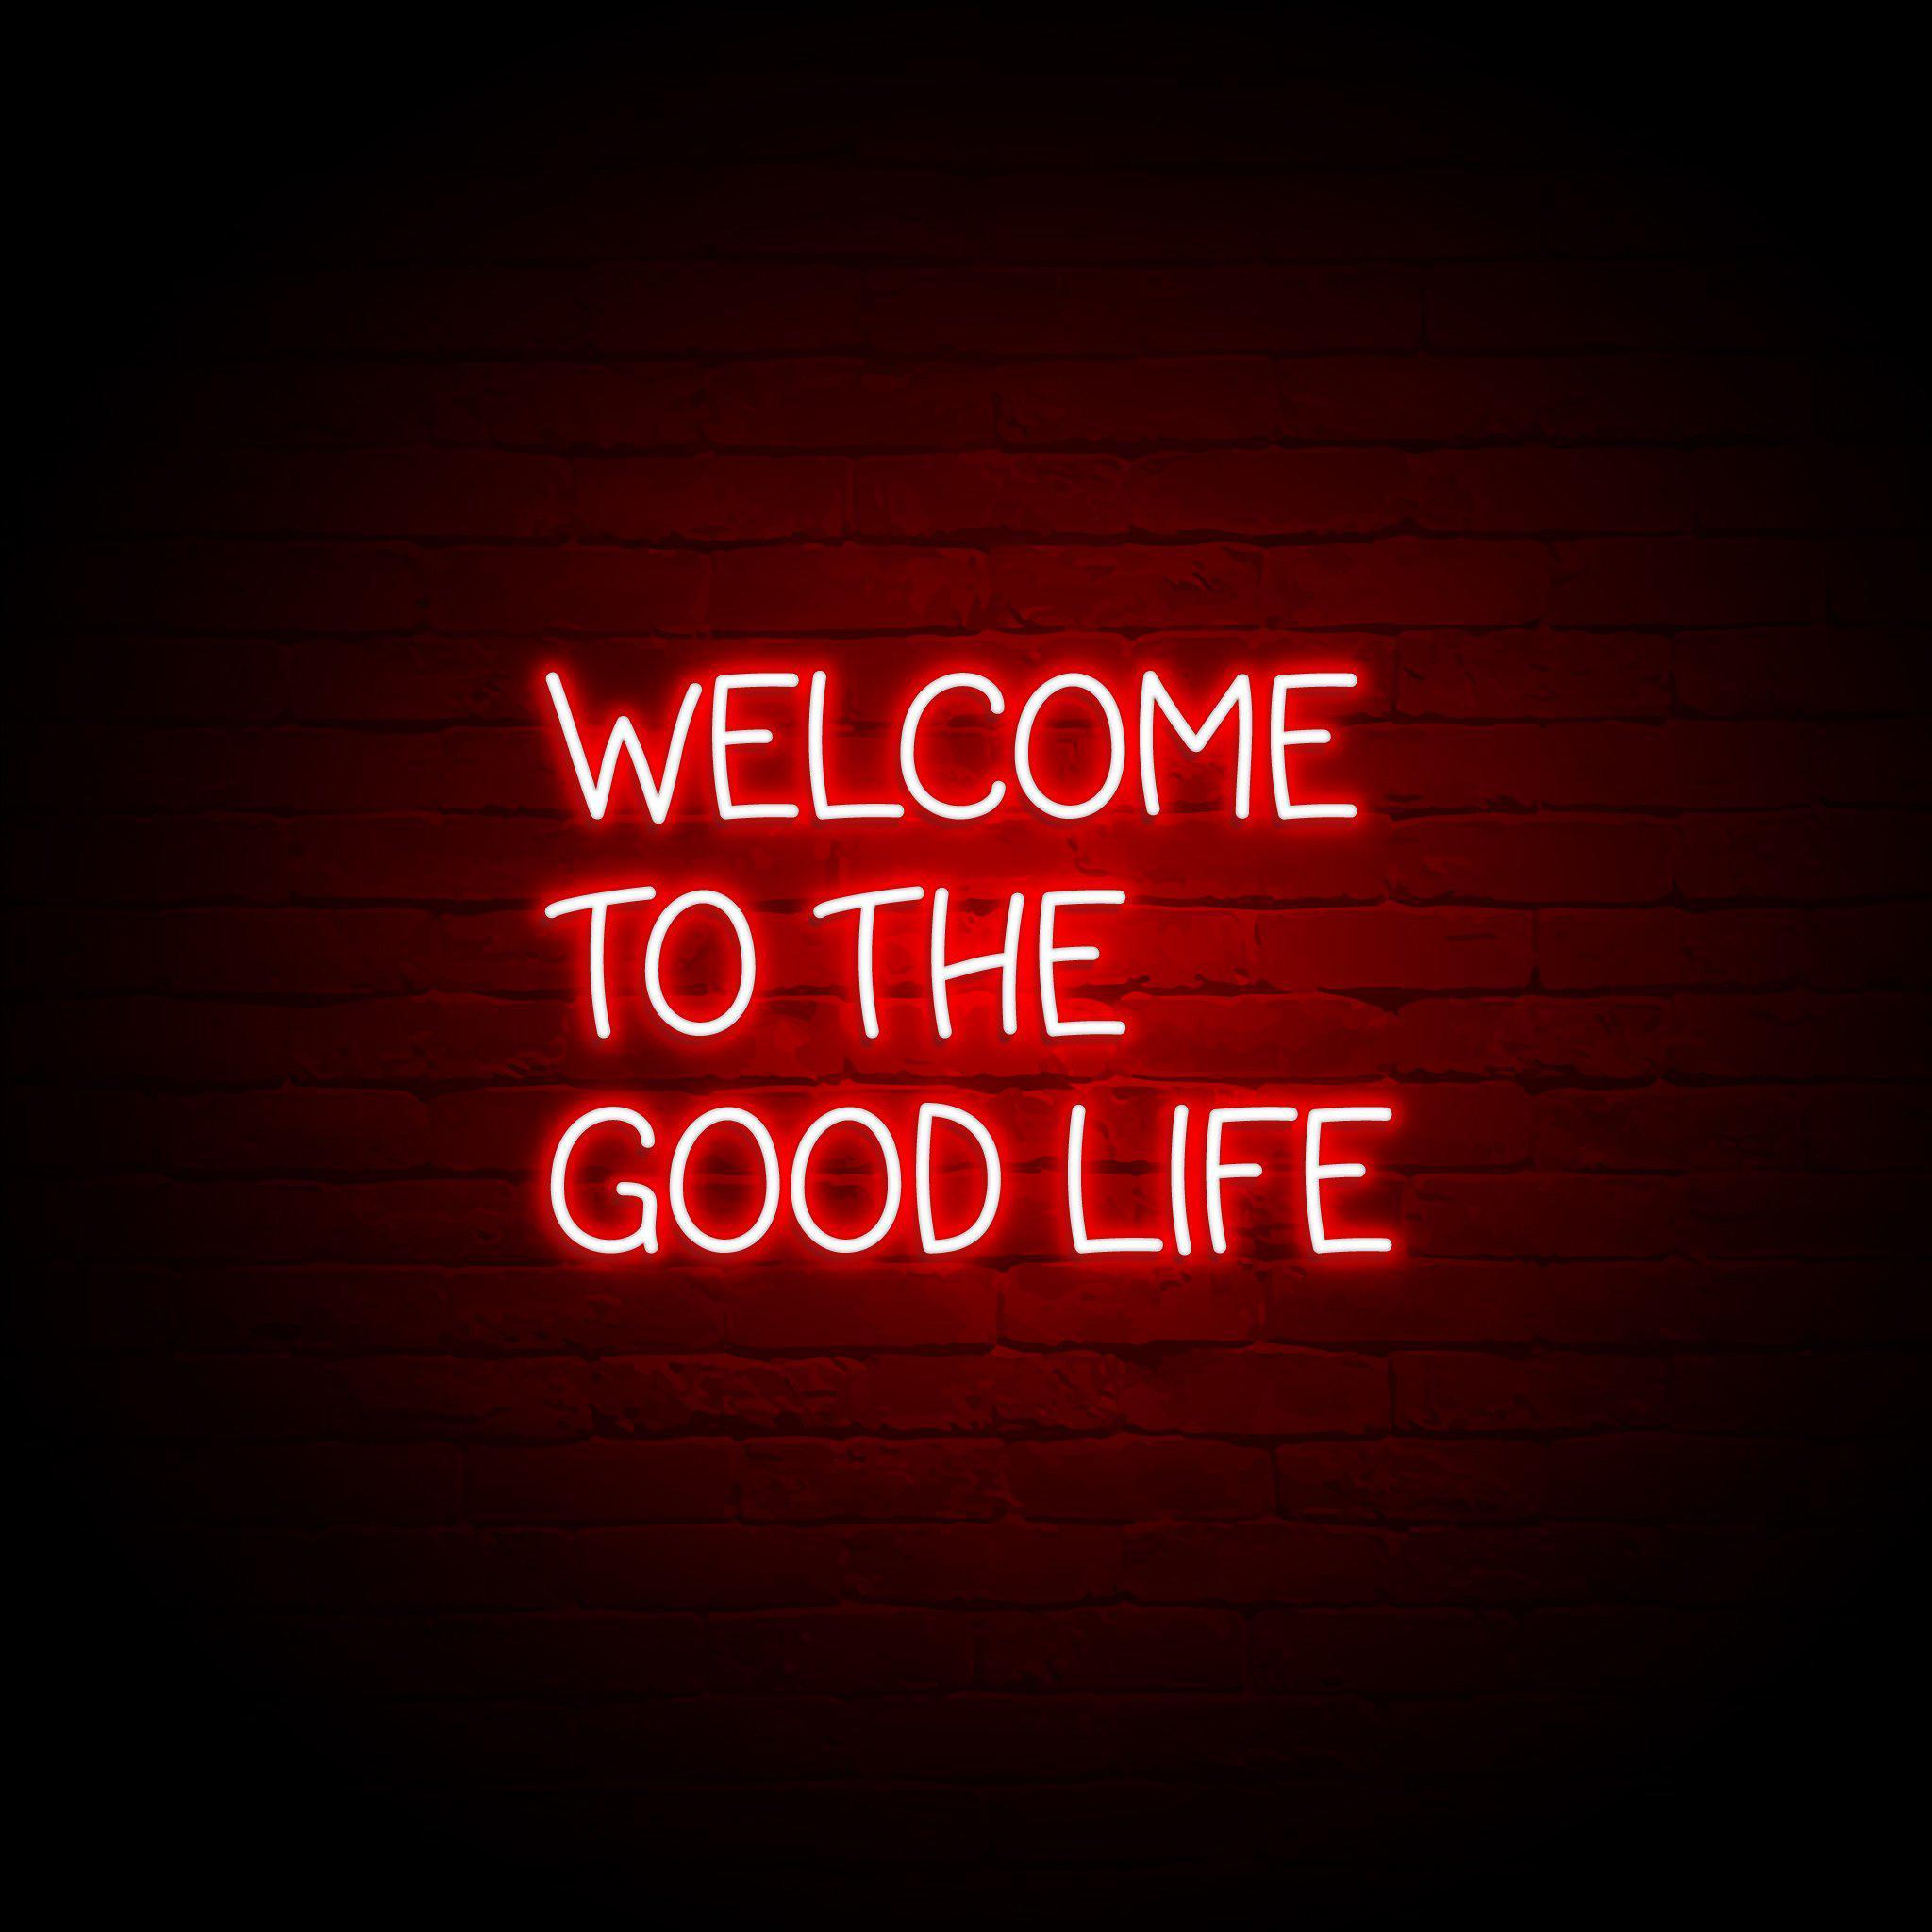 'WELCOME TO THE GOOD LIFE' NEON SIGN